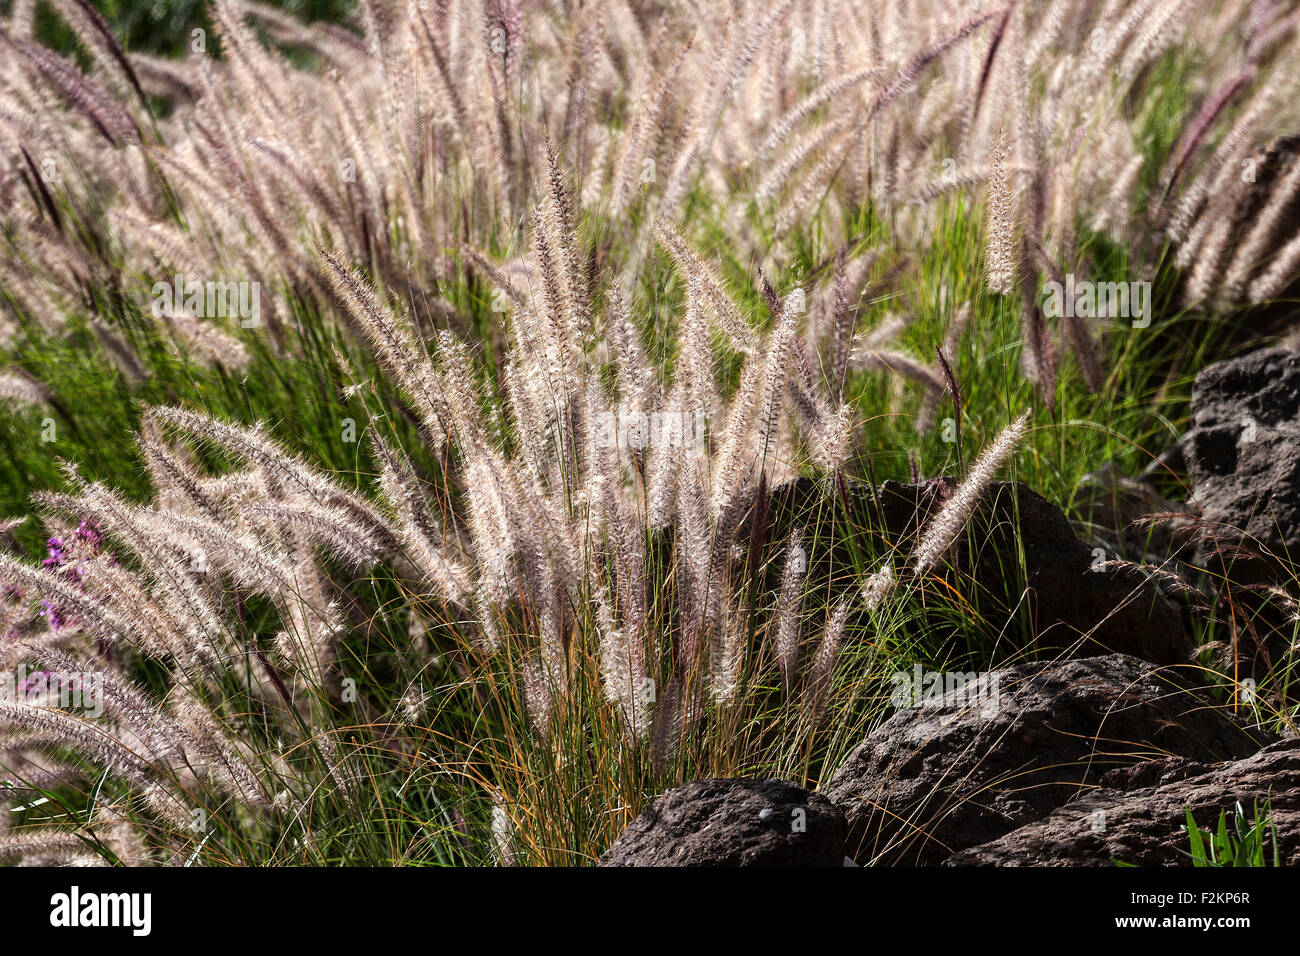 Fountain grass (Pennisetum alopecuroides) flowers, backlit, Gran Canaria, Canary Islands, Spain Stock Photo